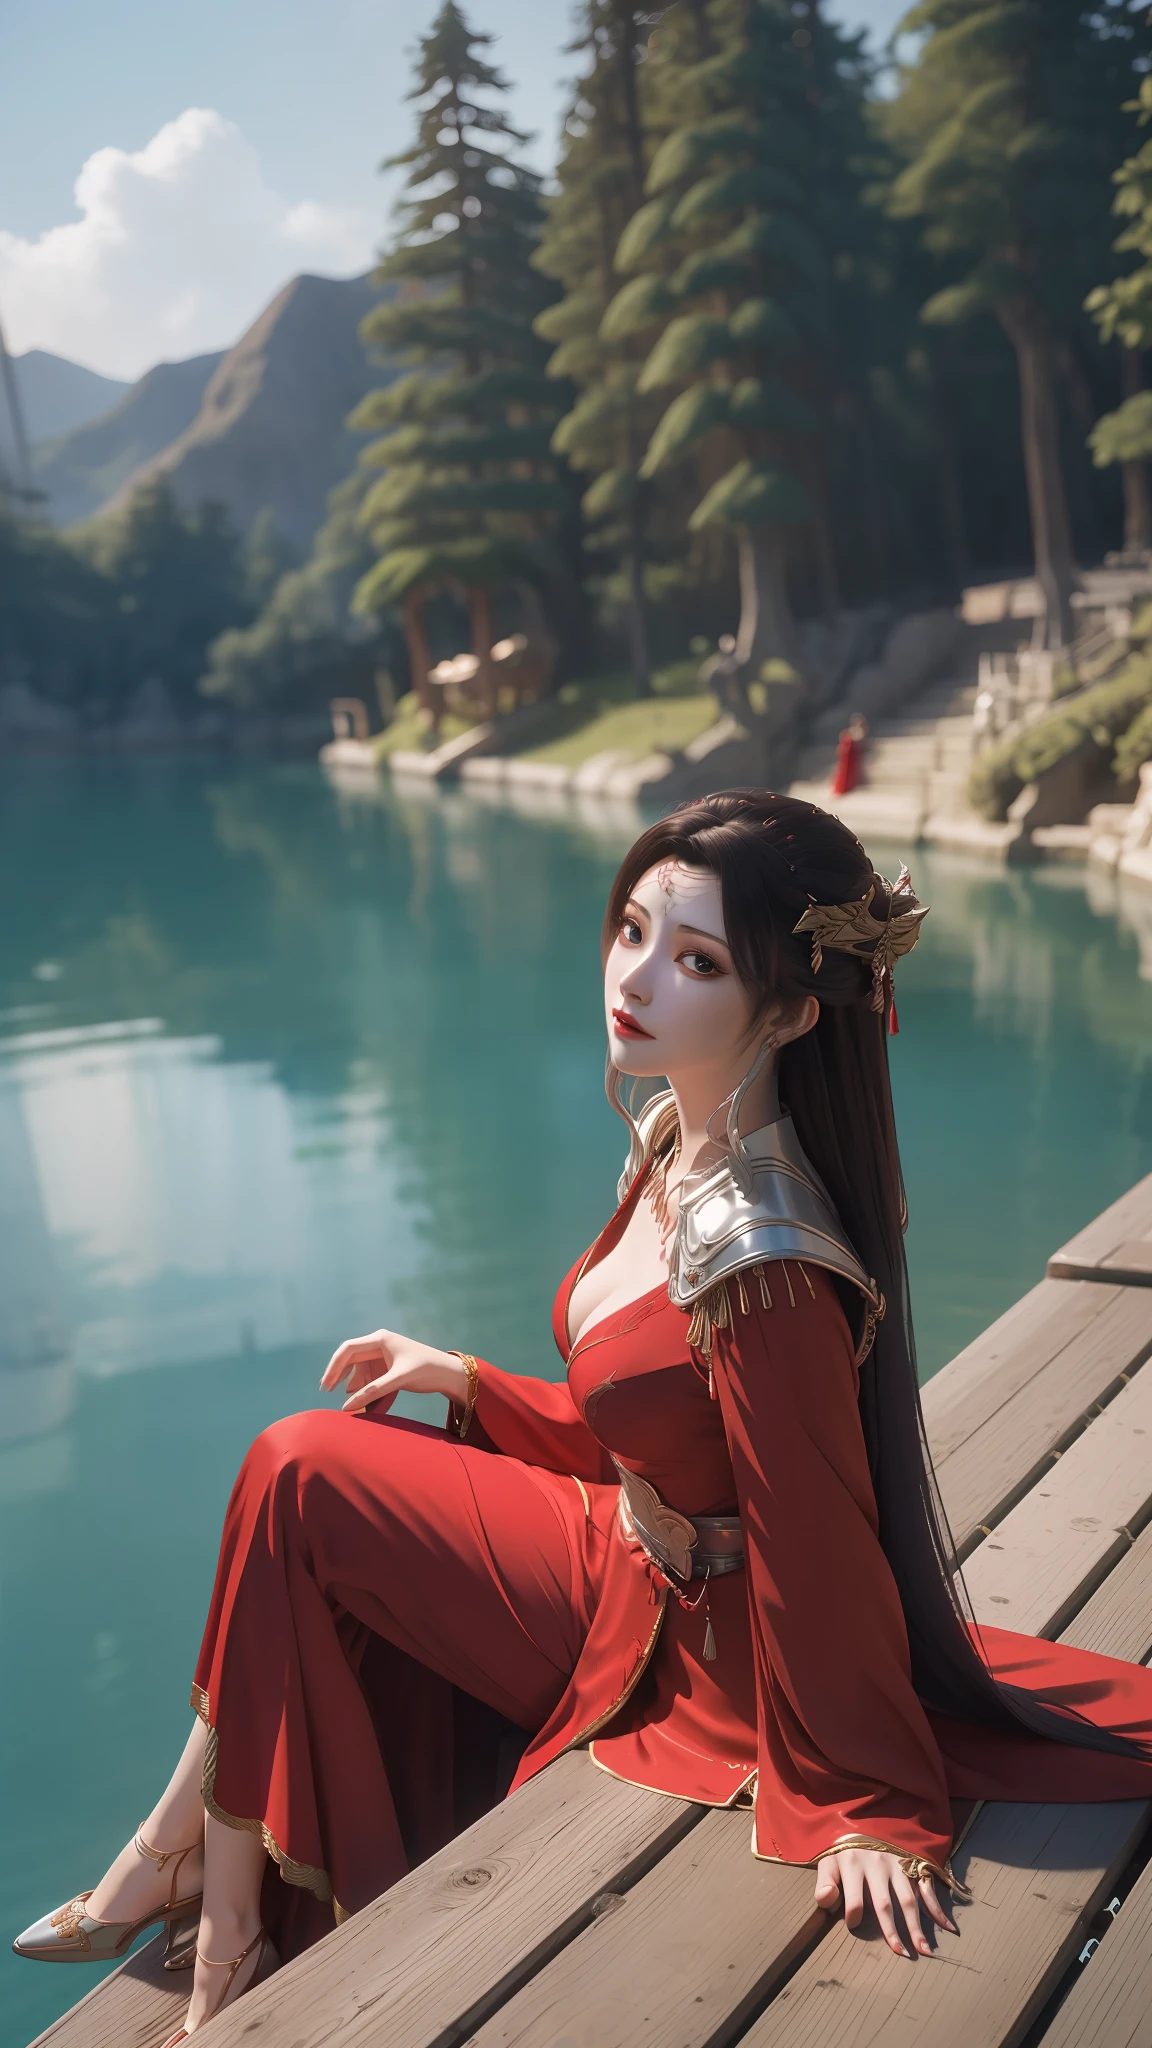 Arad woman in a red dress sitting on a dock by the lake, a photorealistic painting inspired by Du Qiong, Trend of CGsociety, Fantasy art, lady in red armor, wearing gilded red robes, beautiful and seductive anime woman, succubus in tight kilt, wearing gilded red royal robes, silver armor and red clothing, fantasyoutfit